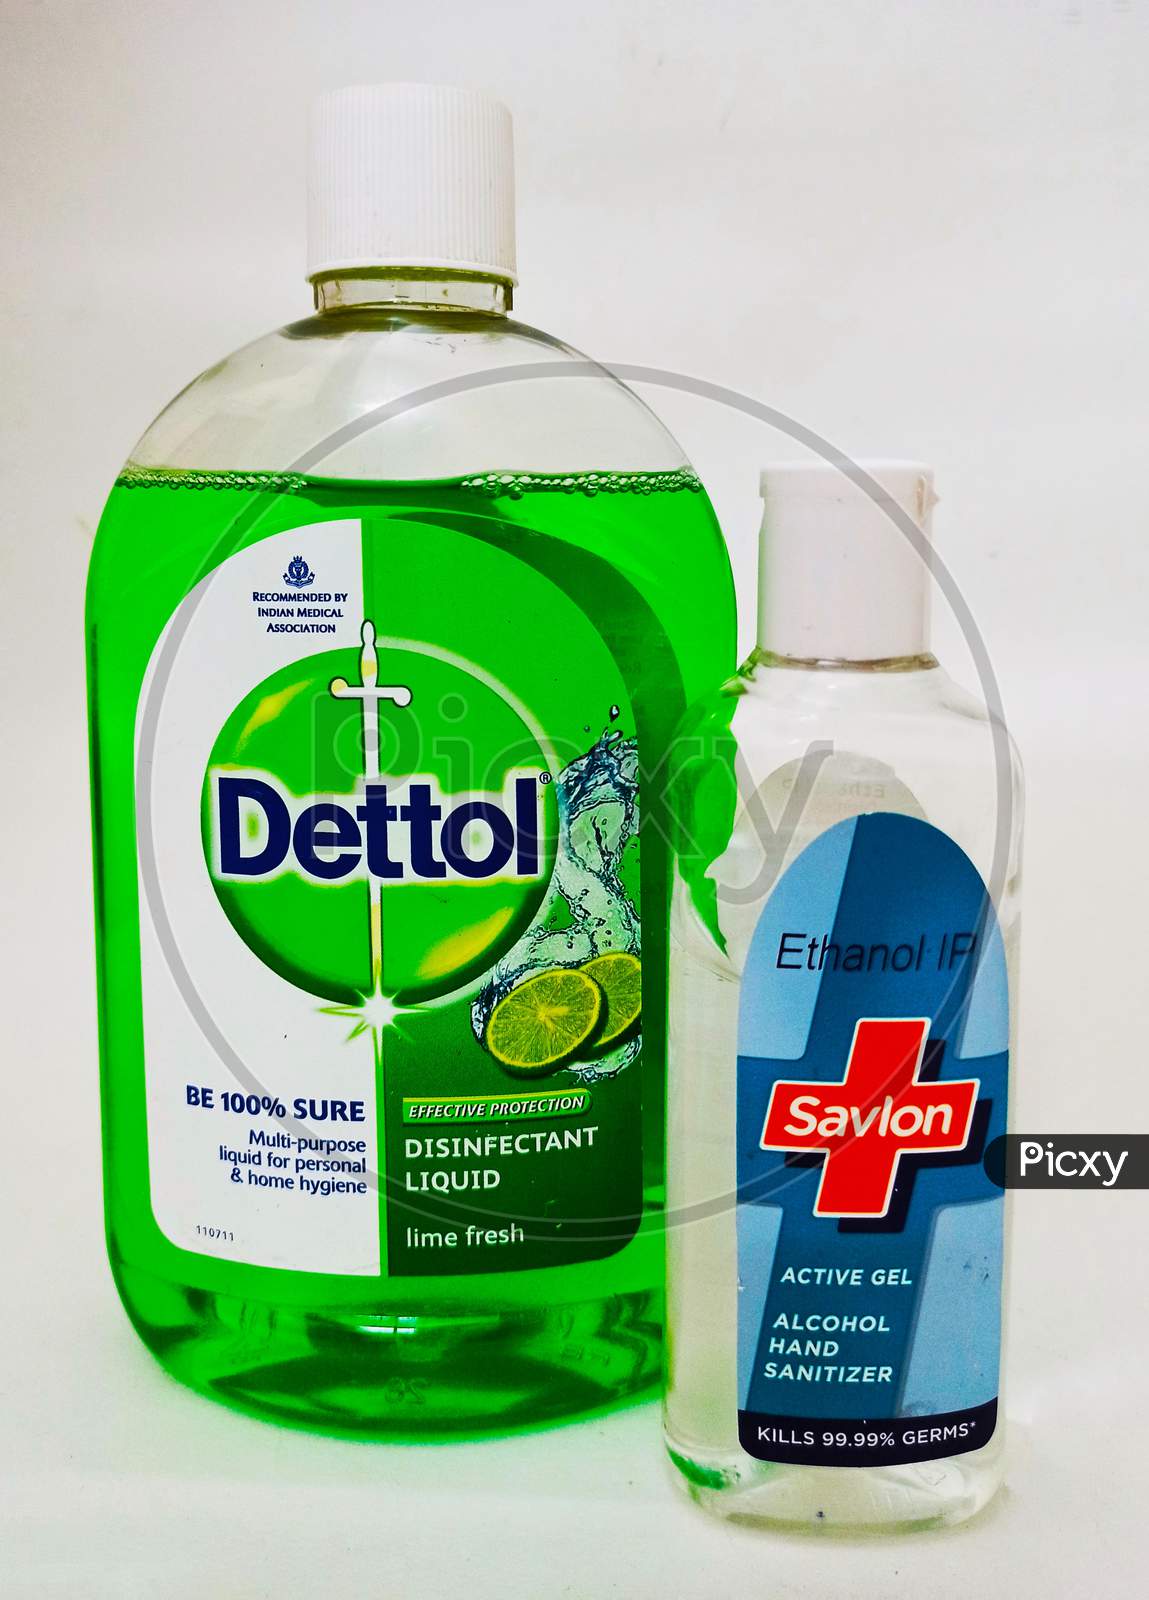 Cleaning and sanitizing products